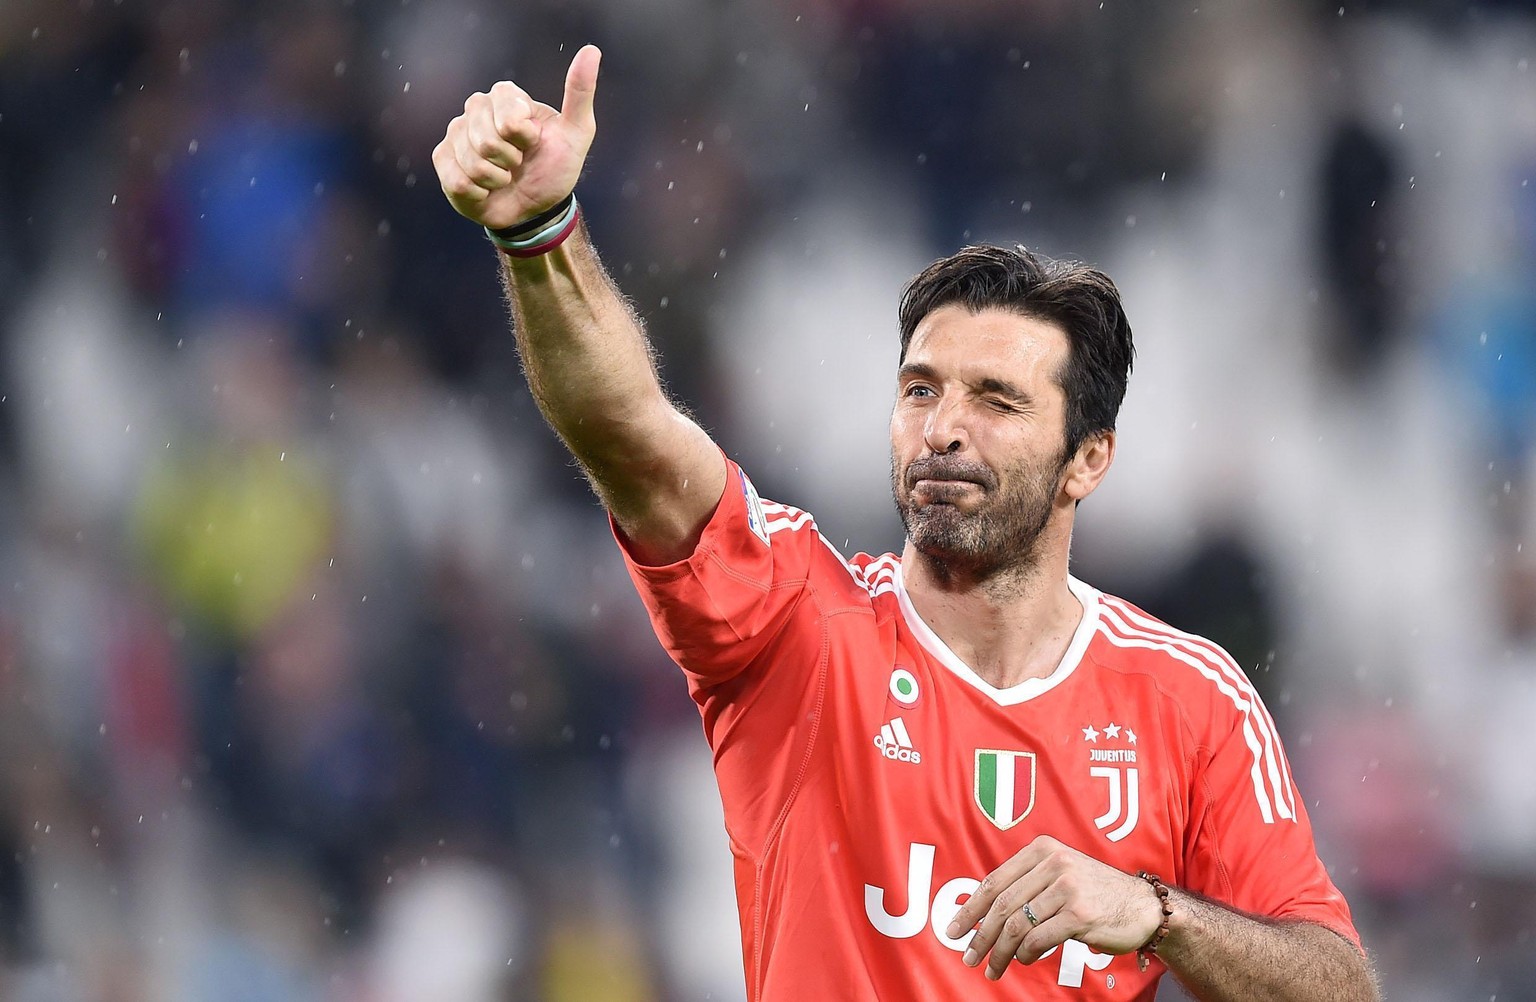 Juventus goalkeeper Gigi Buffon celebrates his team&#039;s victory at the end the Italian Serie A soccer match between Juventus and Sampdoria at the Allianz Stadium in Turin, Italy, Sunday, April 15,  ...